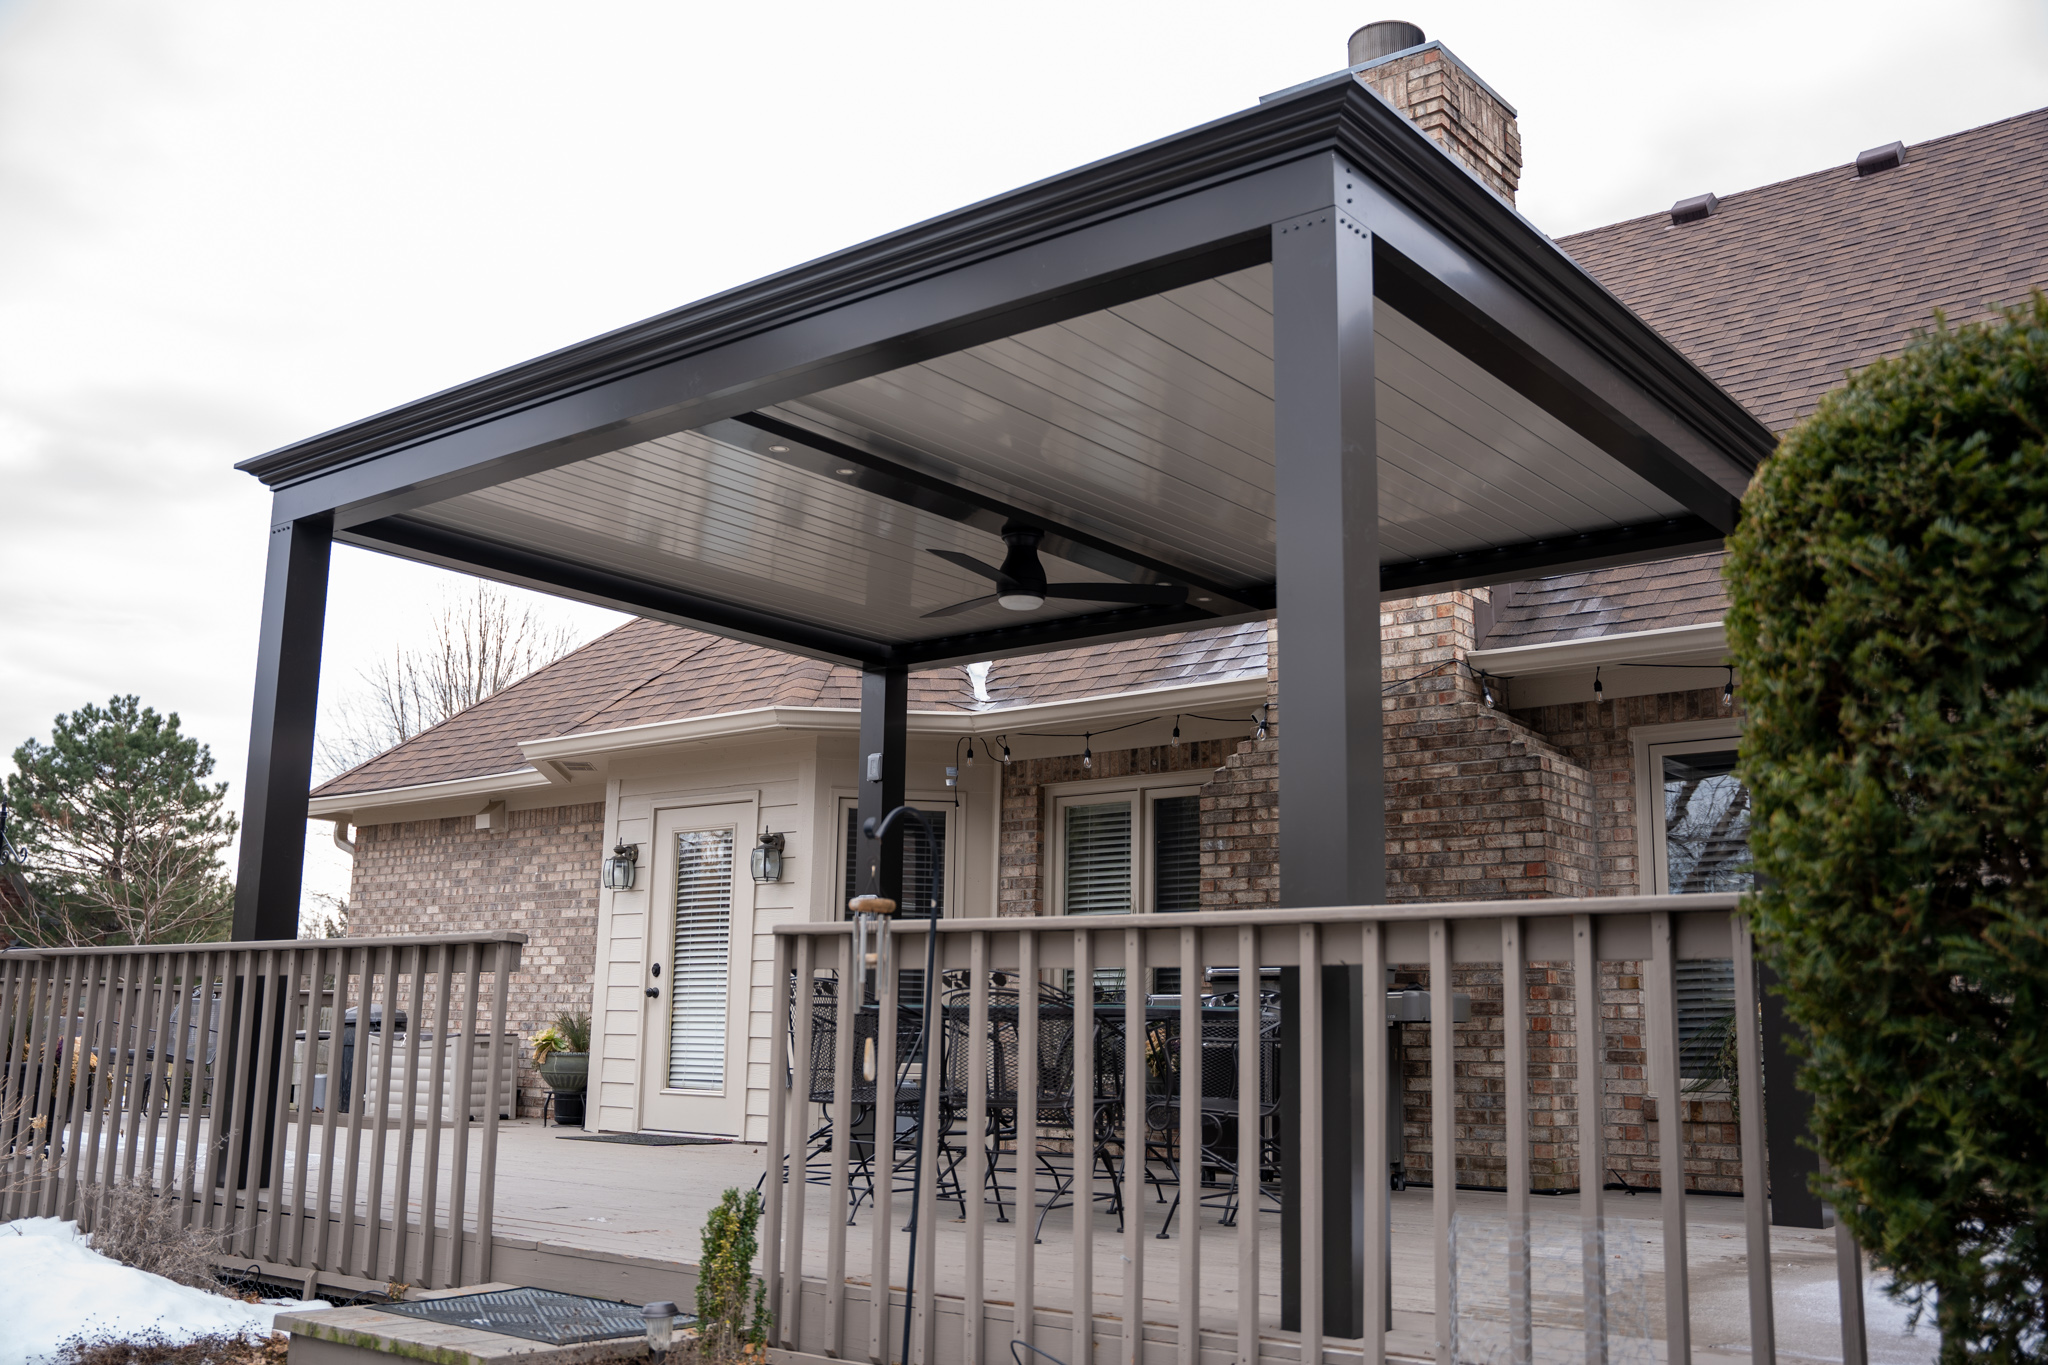 A building permit may be needed for your DIY pergola installation on a concrete pad.